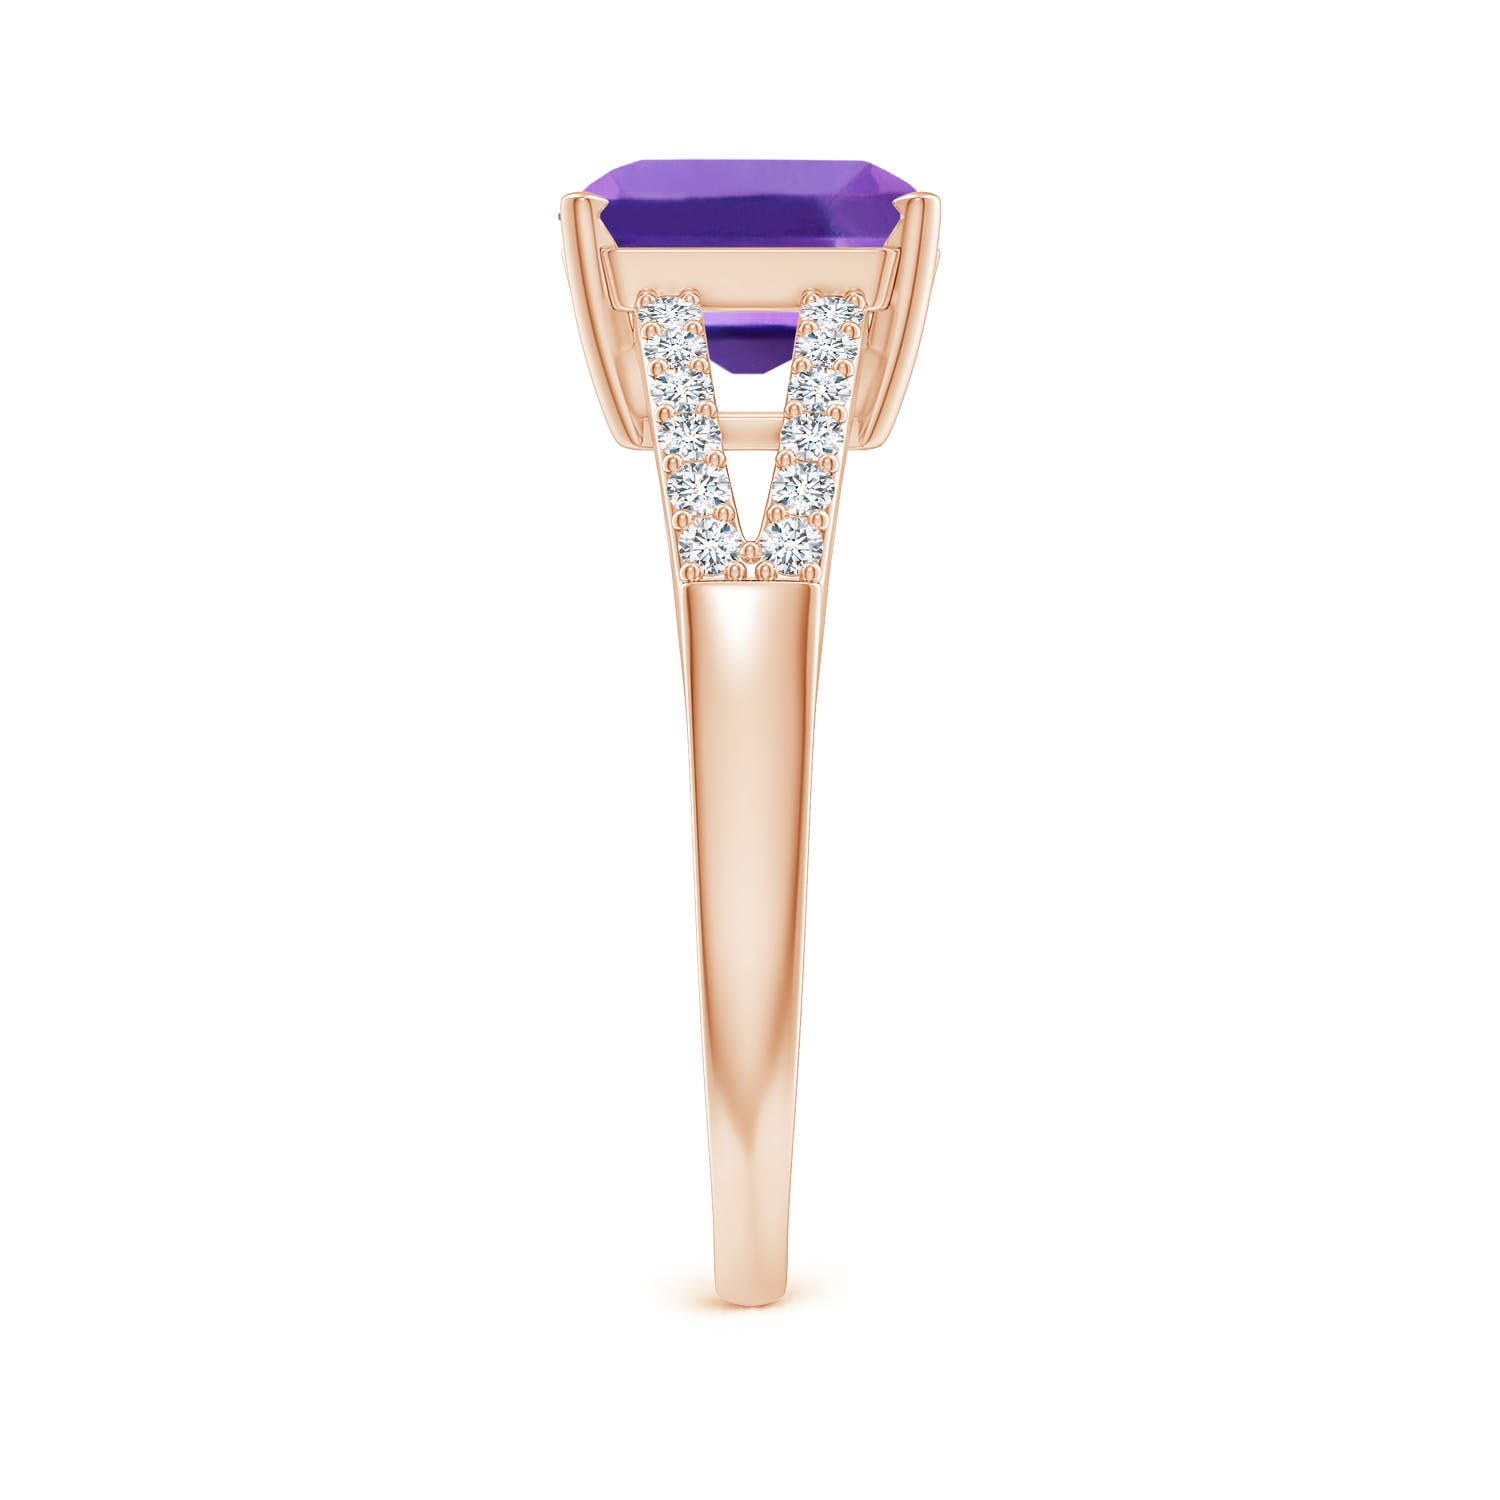 AAA - Amethyst / 2.24 CT / 14 KT Rose Gold